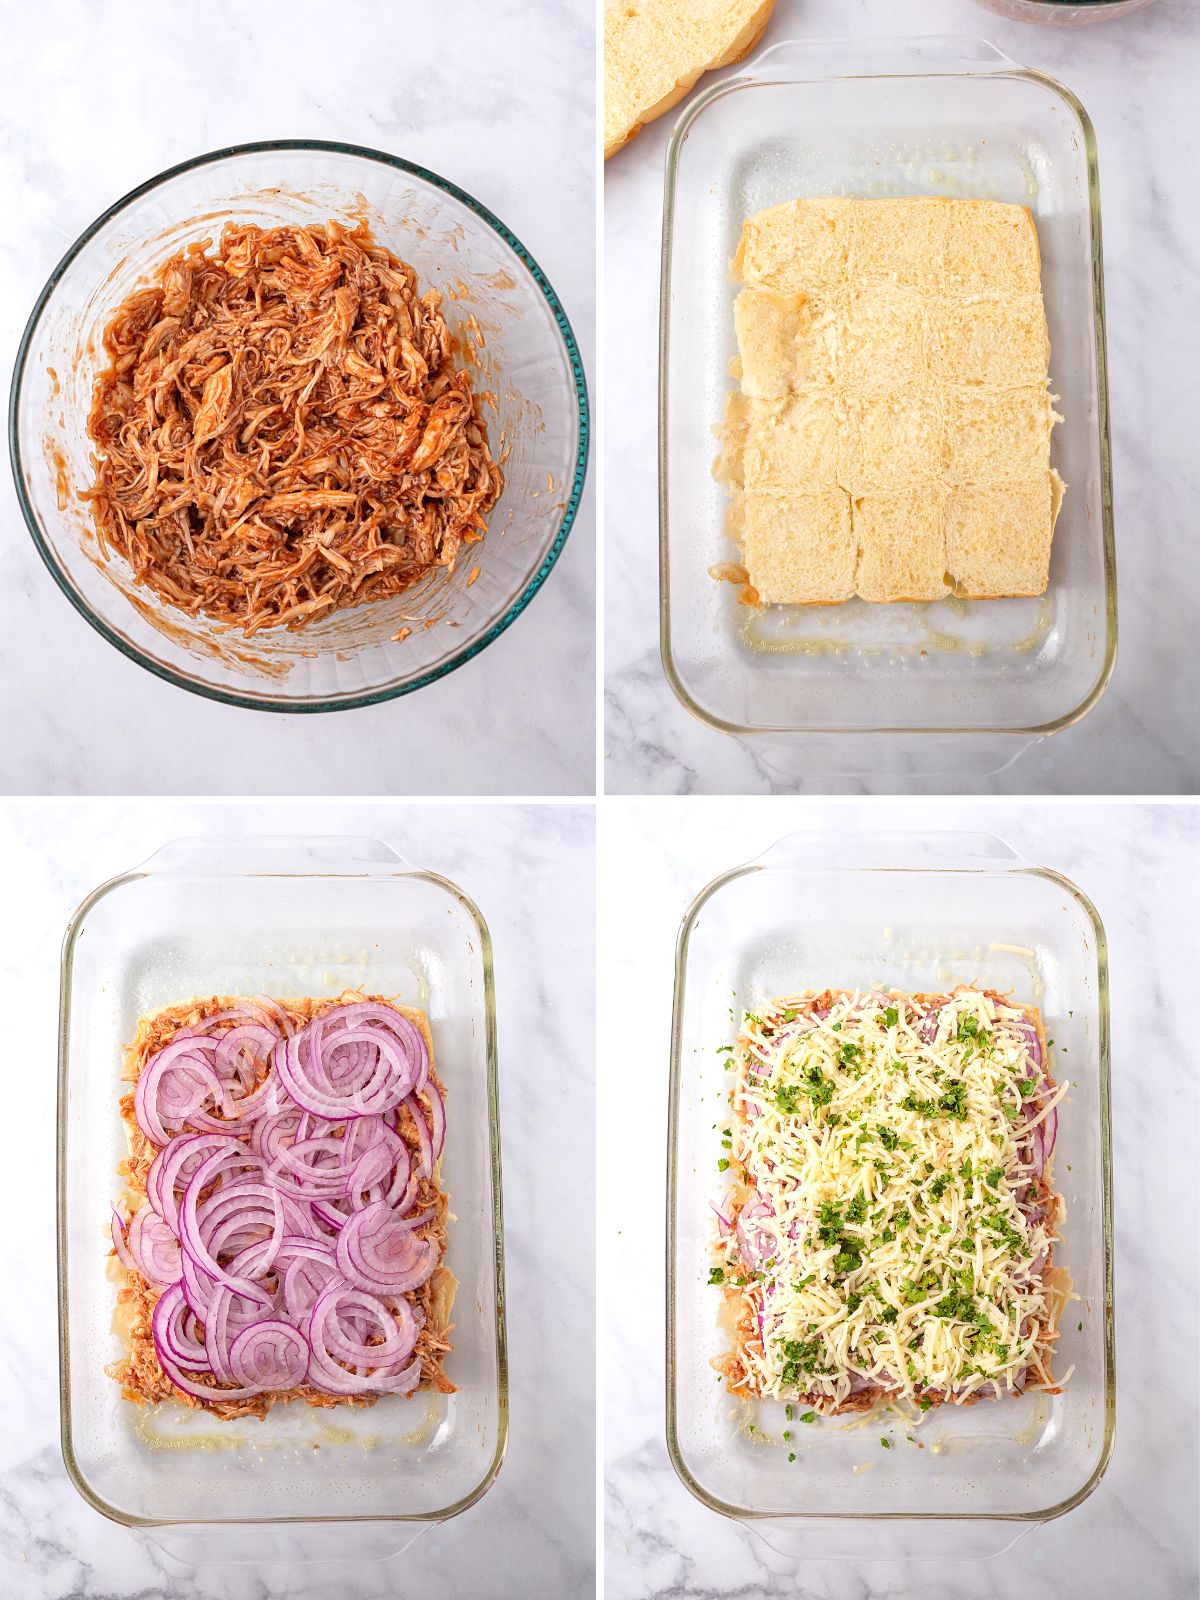 A collage of four images showing how to make this recipe.